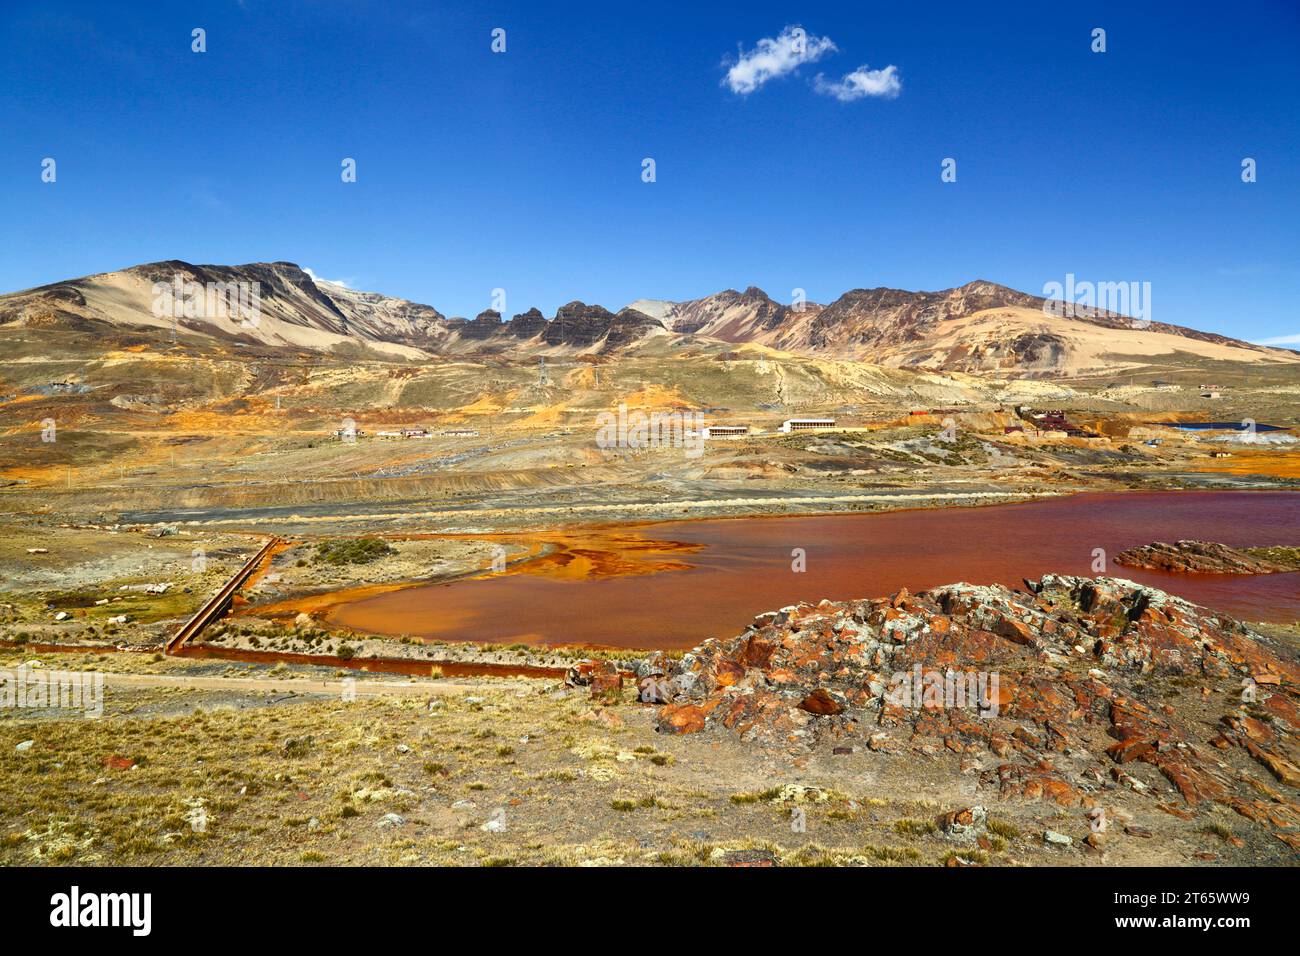 View across lake and aqueduct contaminated by acid mine drainage and industrial waste from the nearby tin mine at Milluni (part of which can be seen on the far bank and mountainside), near La Paz, Bolivia. The mountains are the foothills of the Mt Chacaltaya massif. Stock Photo